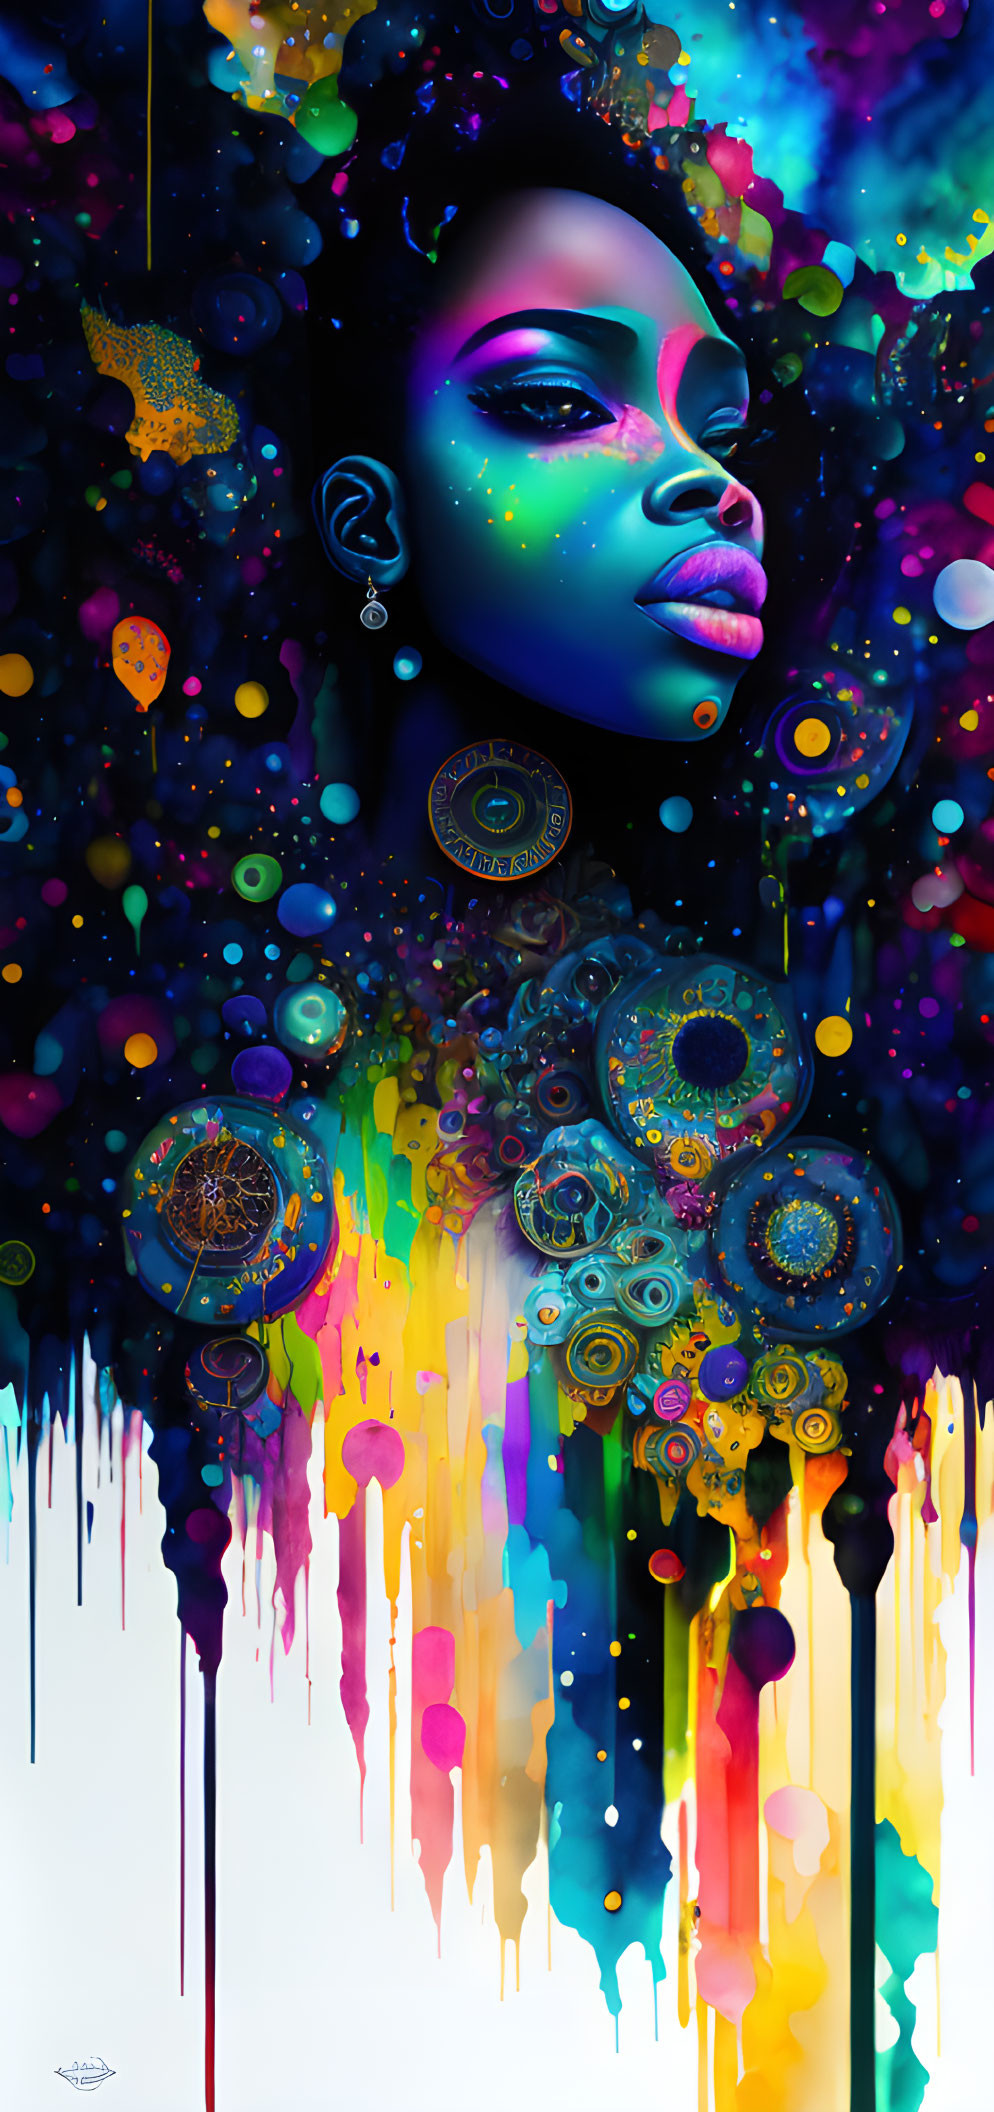 Colorful digital artwork: Woman with blue skin in cosmic setting